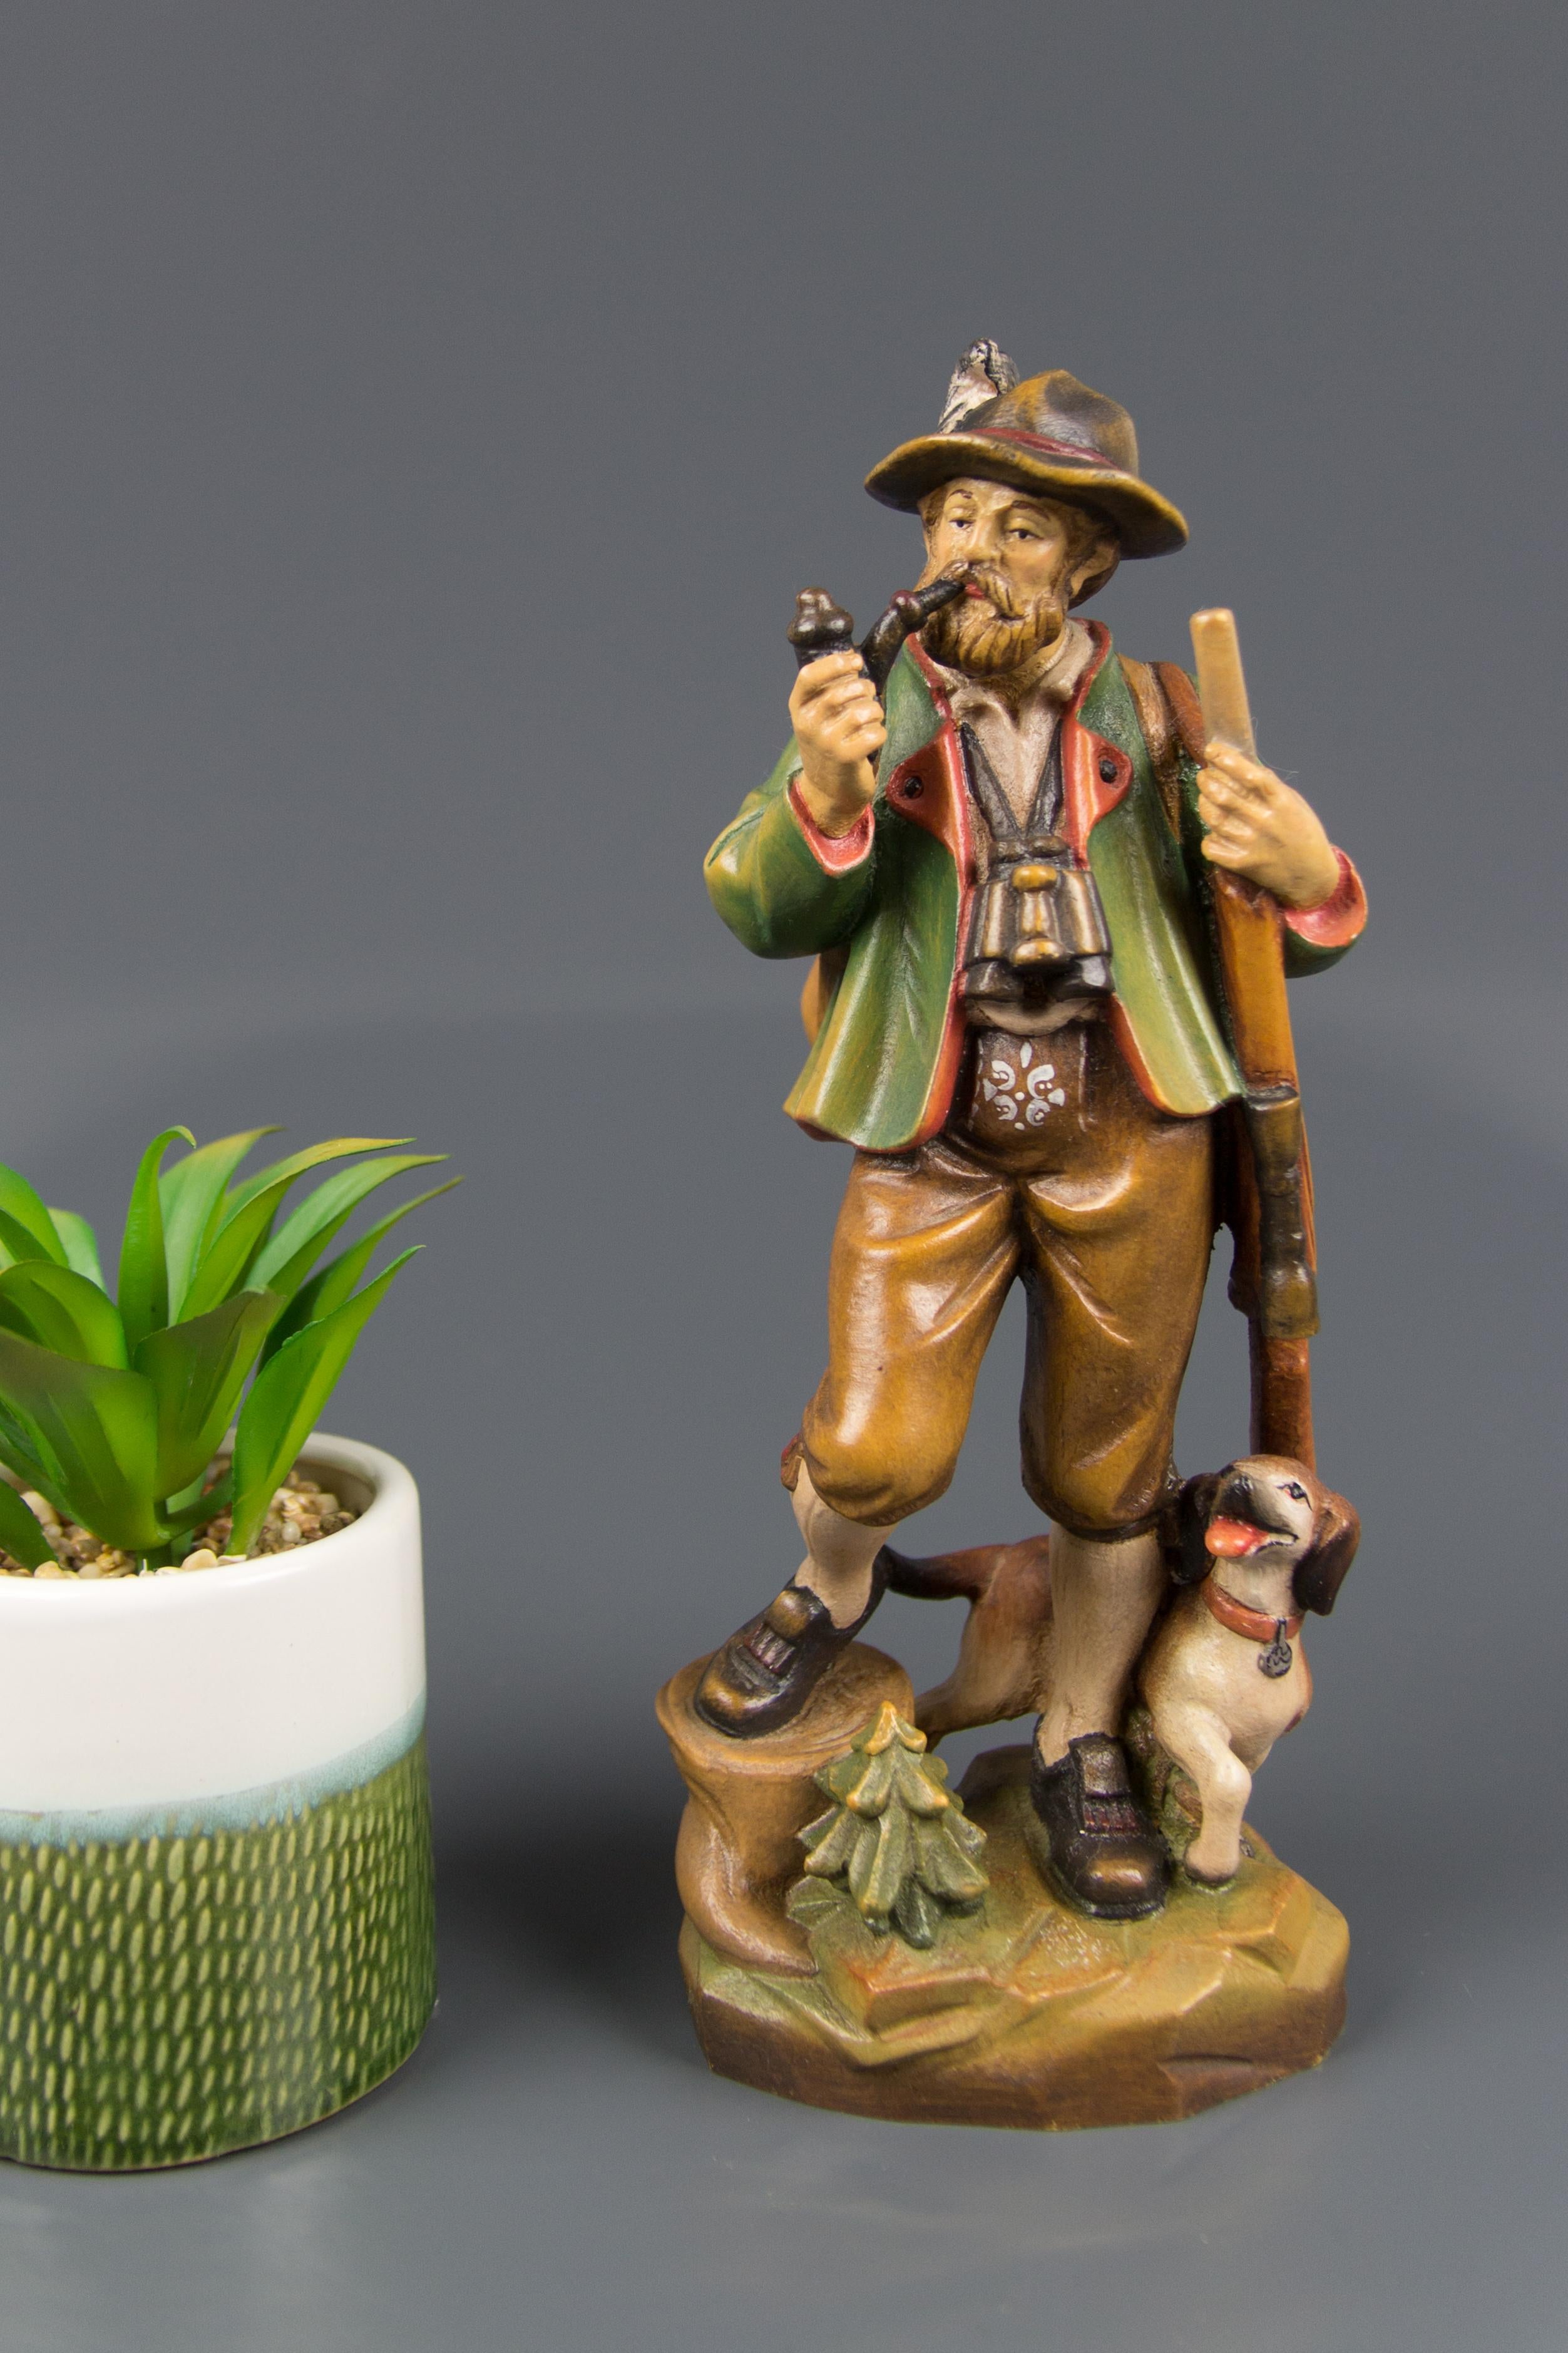 A masterfully carved and hand painted wooden sculpture of a hunter with his dog and gun. This adorable sculpture, beautifully crafted in detail, will decorate any room or make a great gift for a hunting enthusiast.
Dimensions: height 24 cm / 9.44